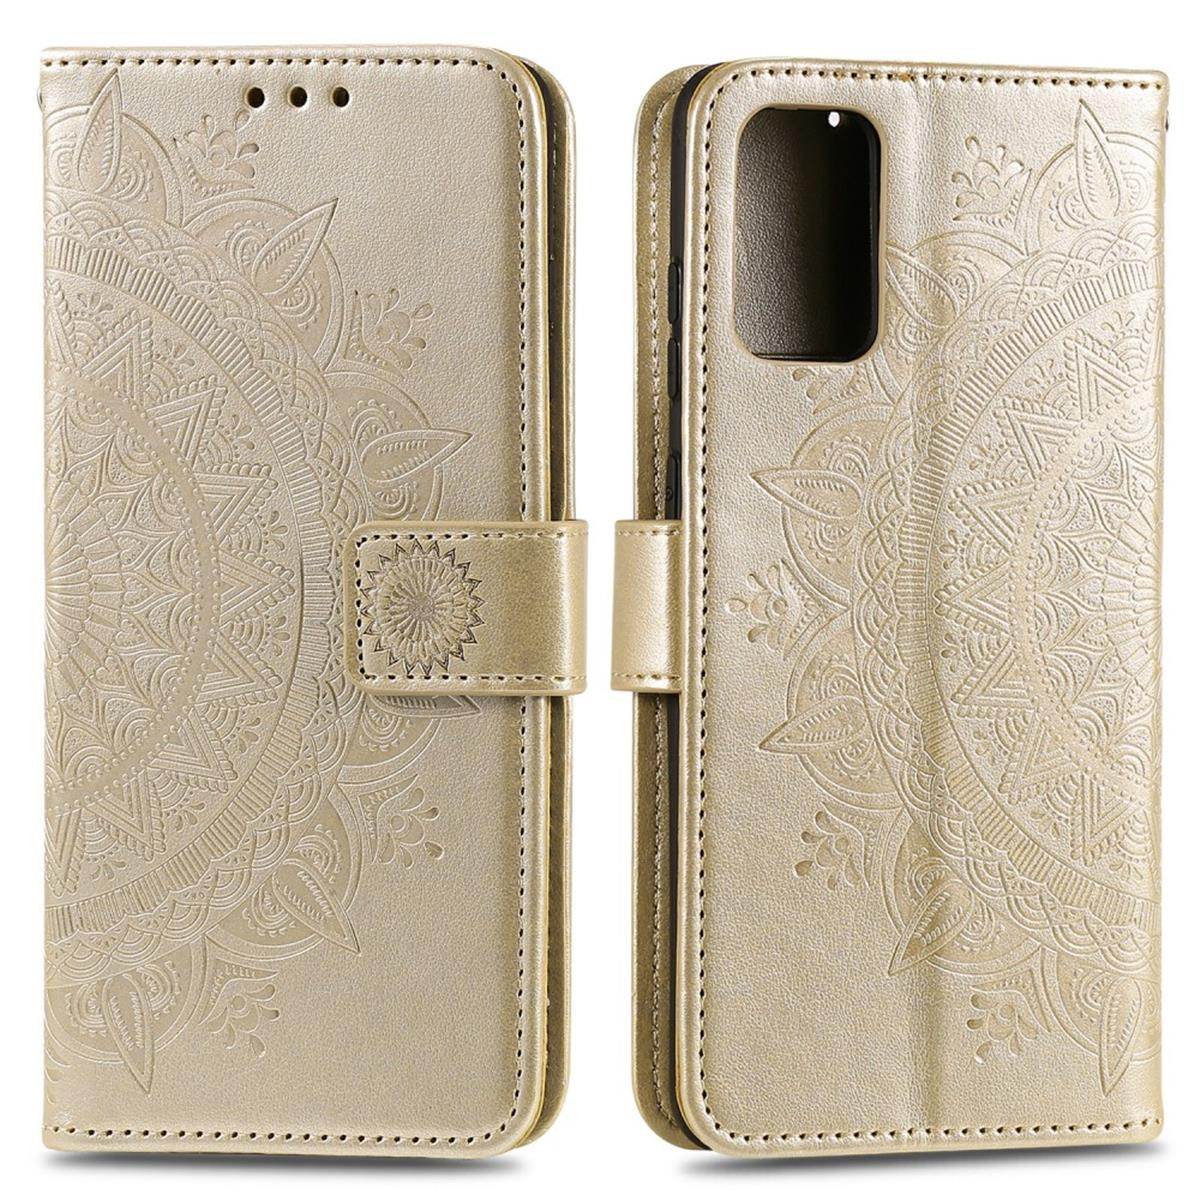 Samsung, Klapphülle Muster, mit Bookcover, Mandala Galaxy COVERKINGZ Gold M31s,